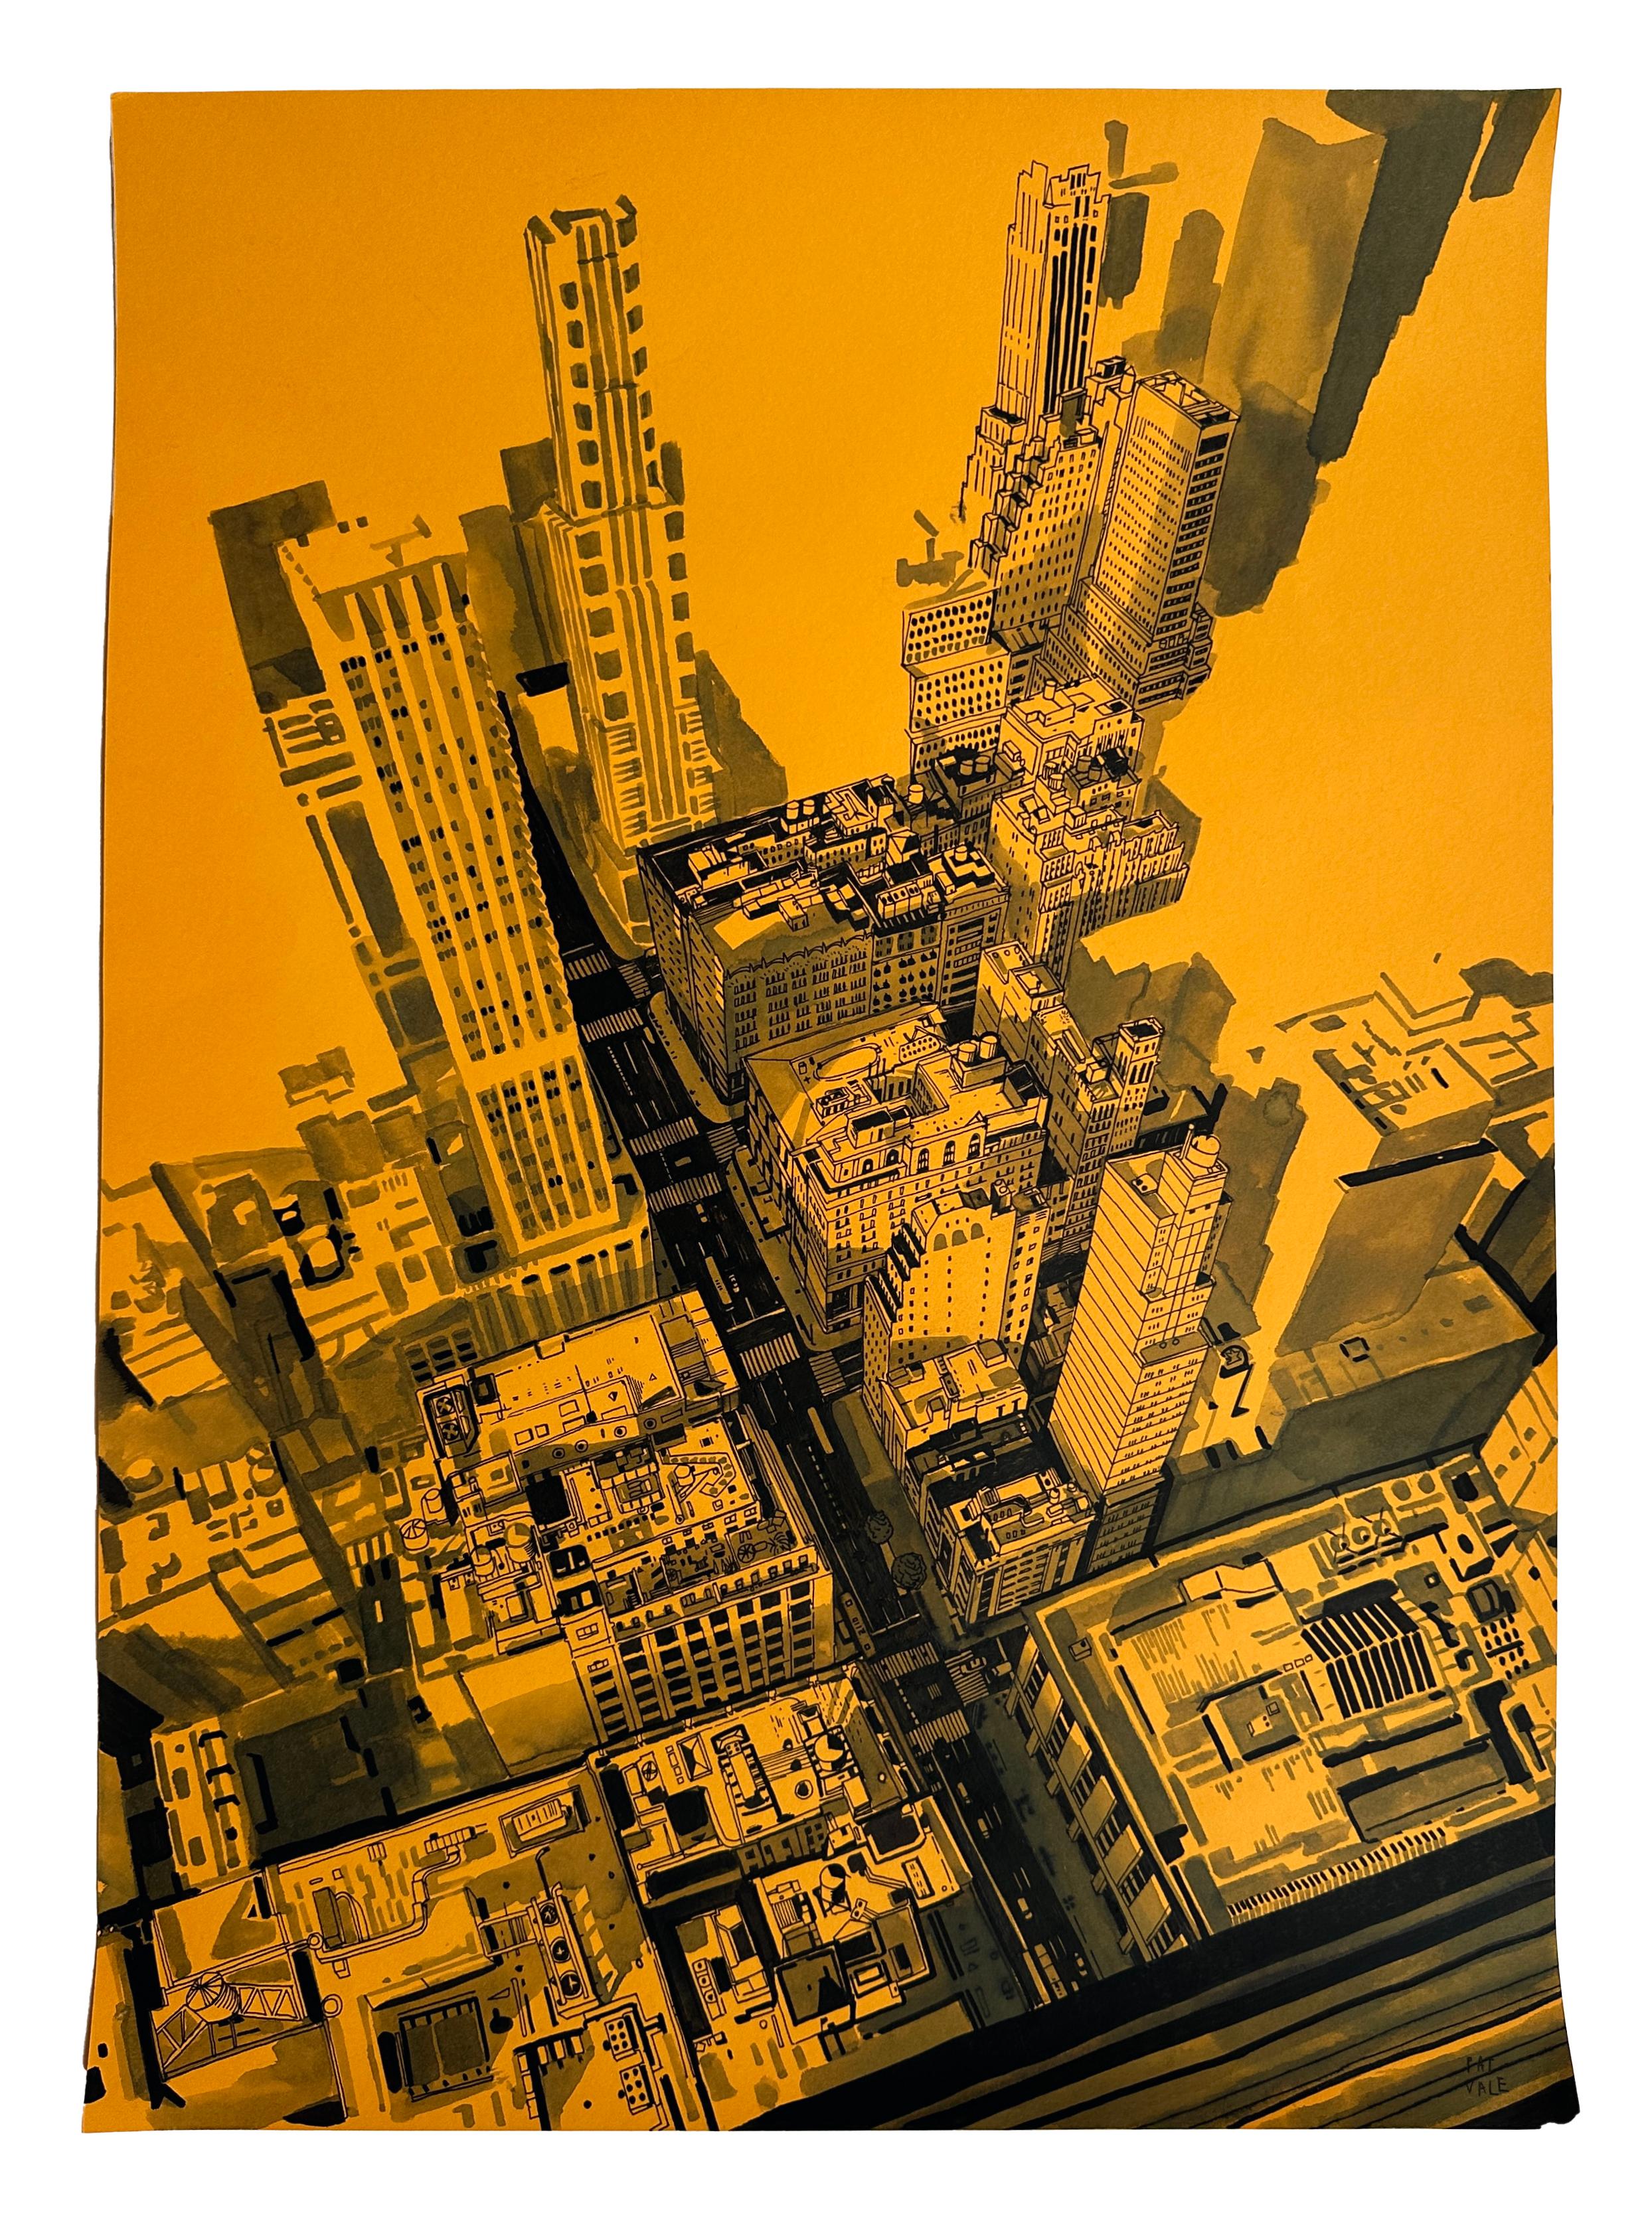 Patrick Vale Abstract Painting - ES III - NYC Birdseye View on Bright Orange Paper, Original, Framed